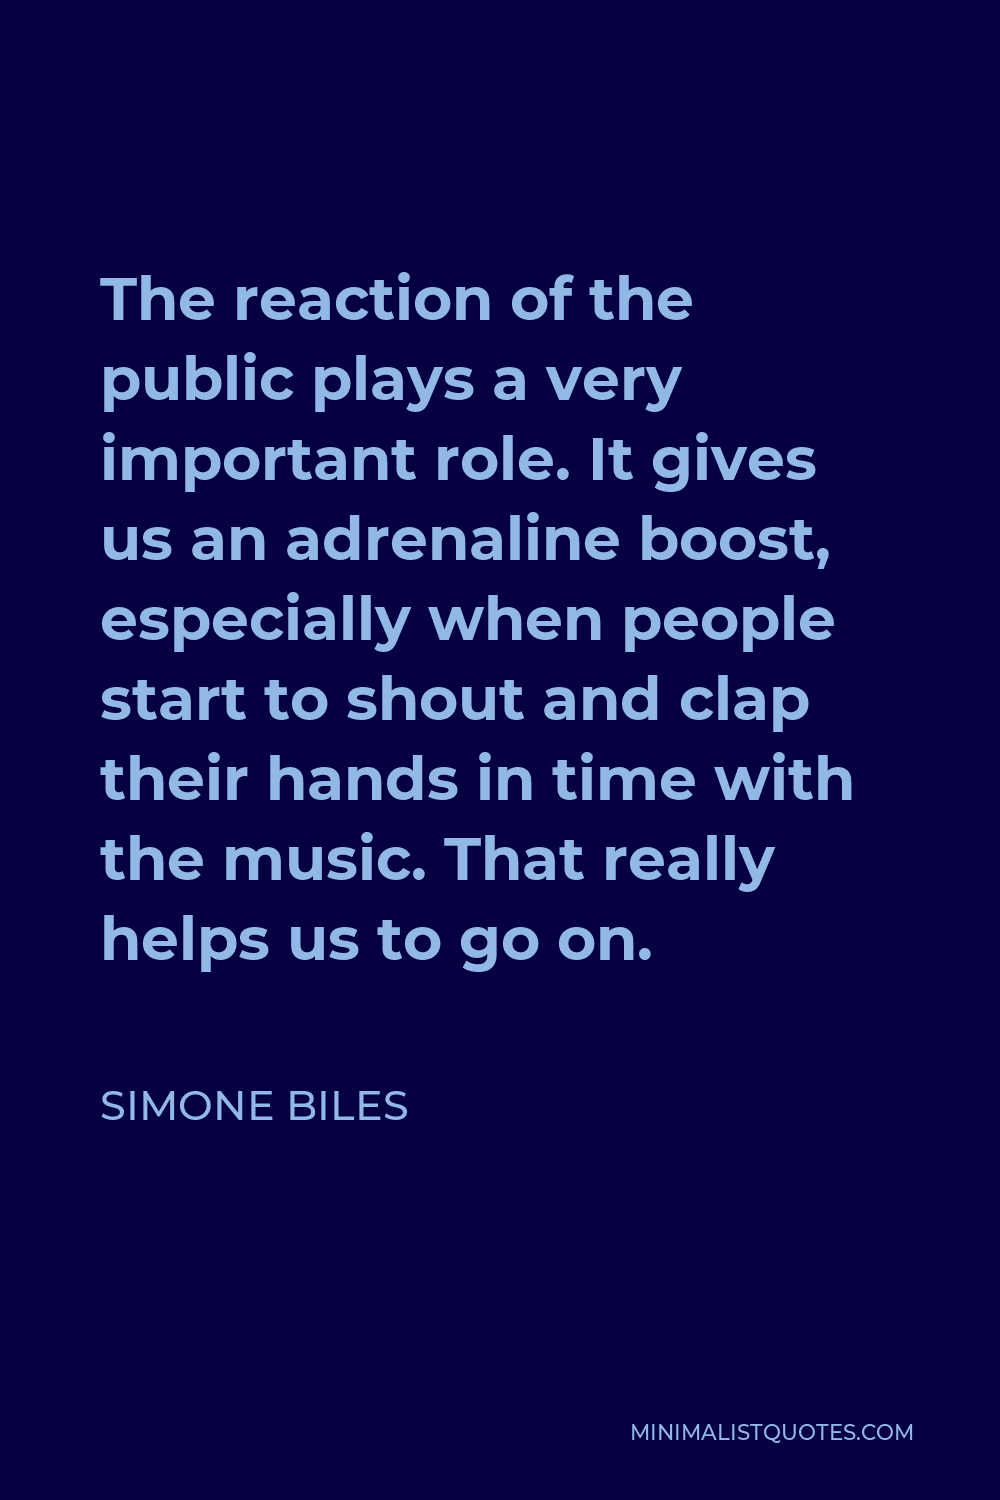 Simone Biles Quote - The reaction of the public plays a very important role. It gives us an adrenaline boost, especially when people start to shout and clap their hands in time with the music. That really helps us to go on.